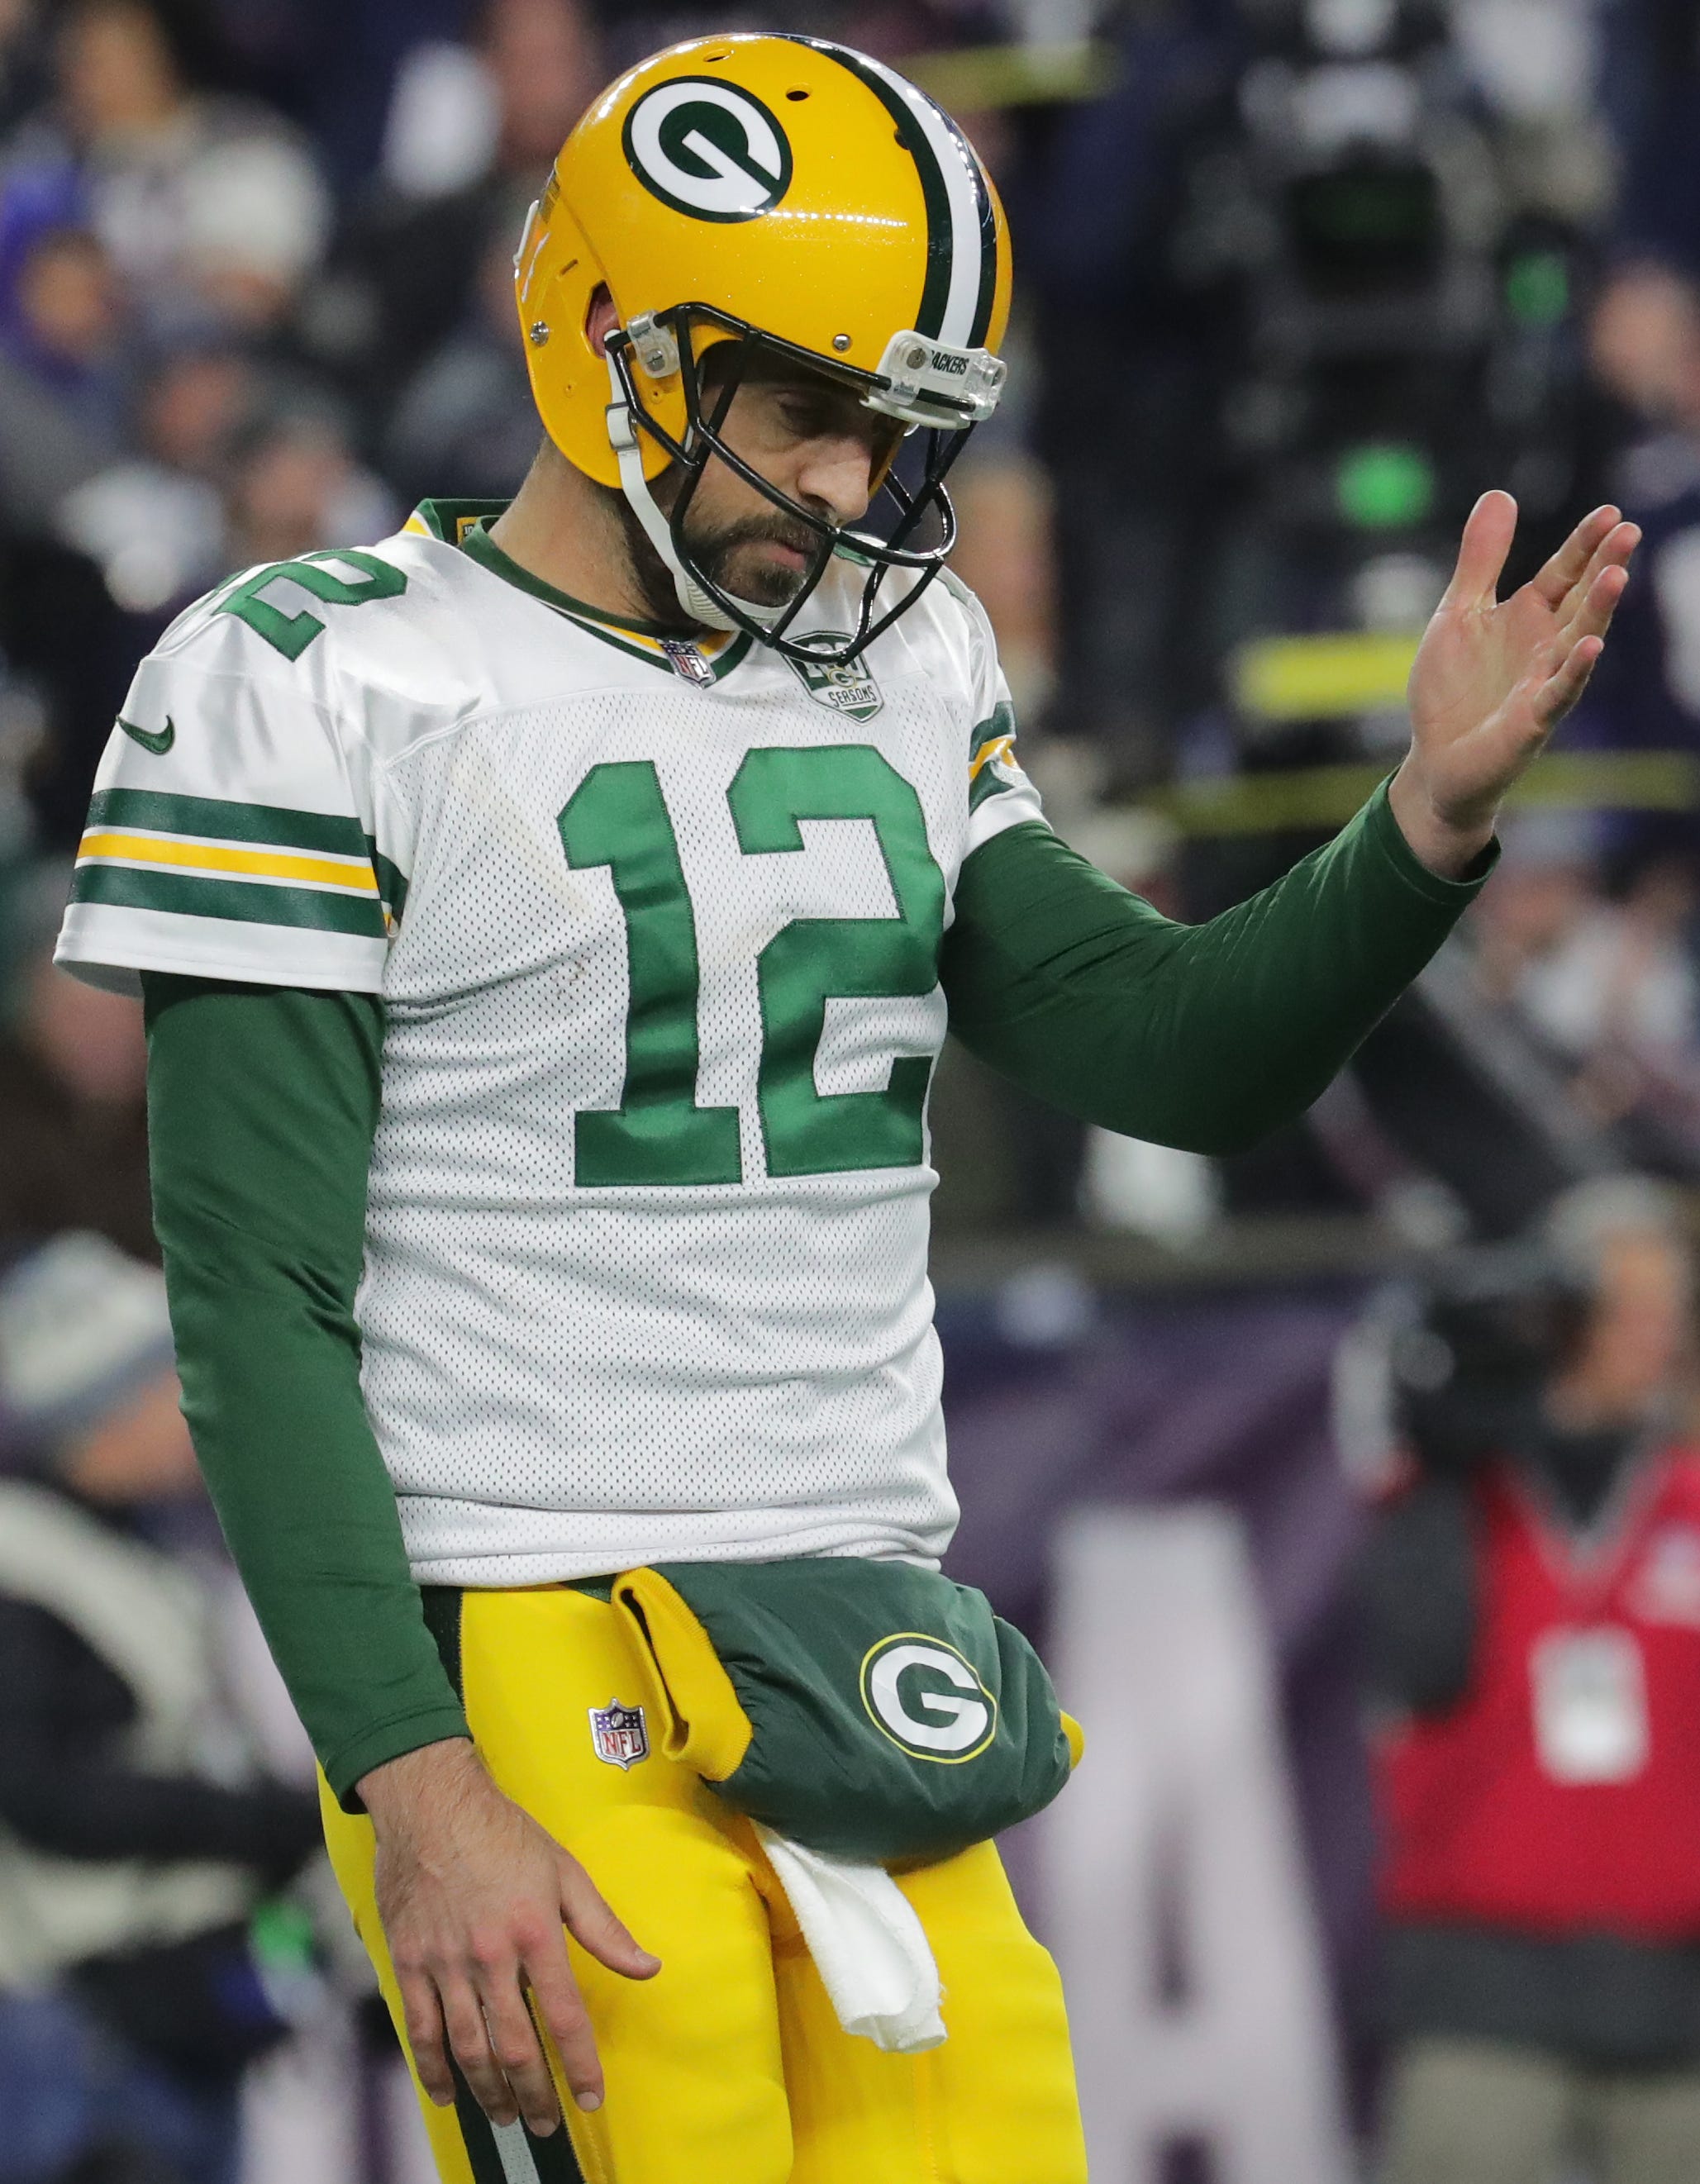 Packers quarterback Aaron Rodgers isn't happy as he walks off the field after the offense failed to convert a third down against the Patriots during the third quarter on Sunday night.